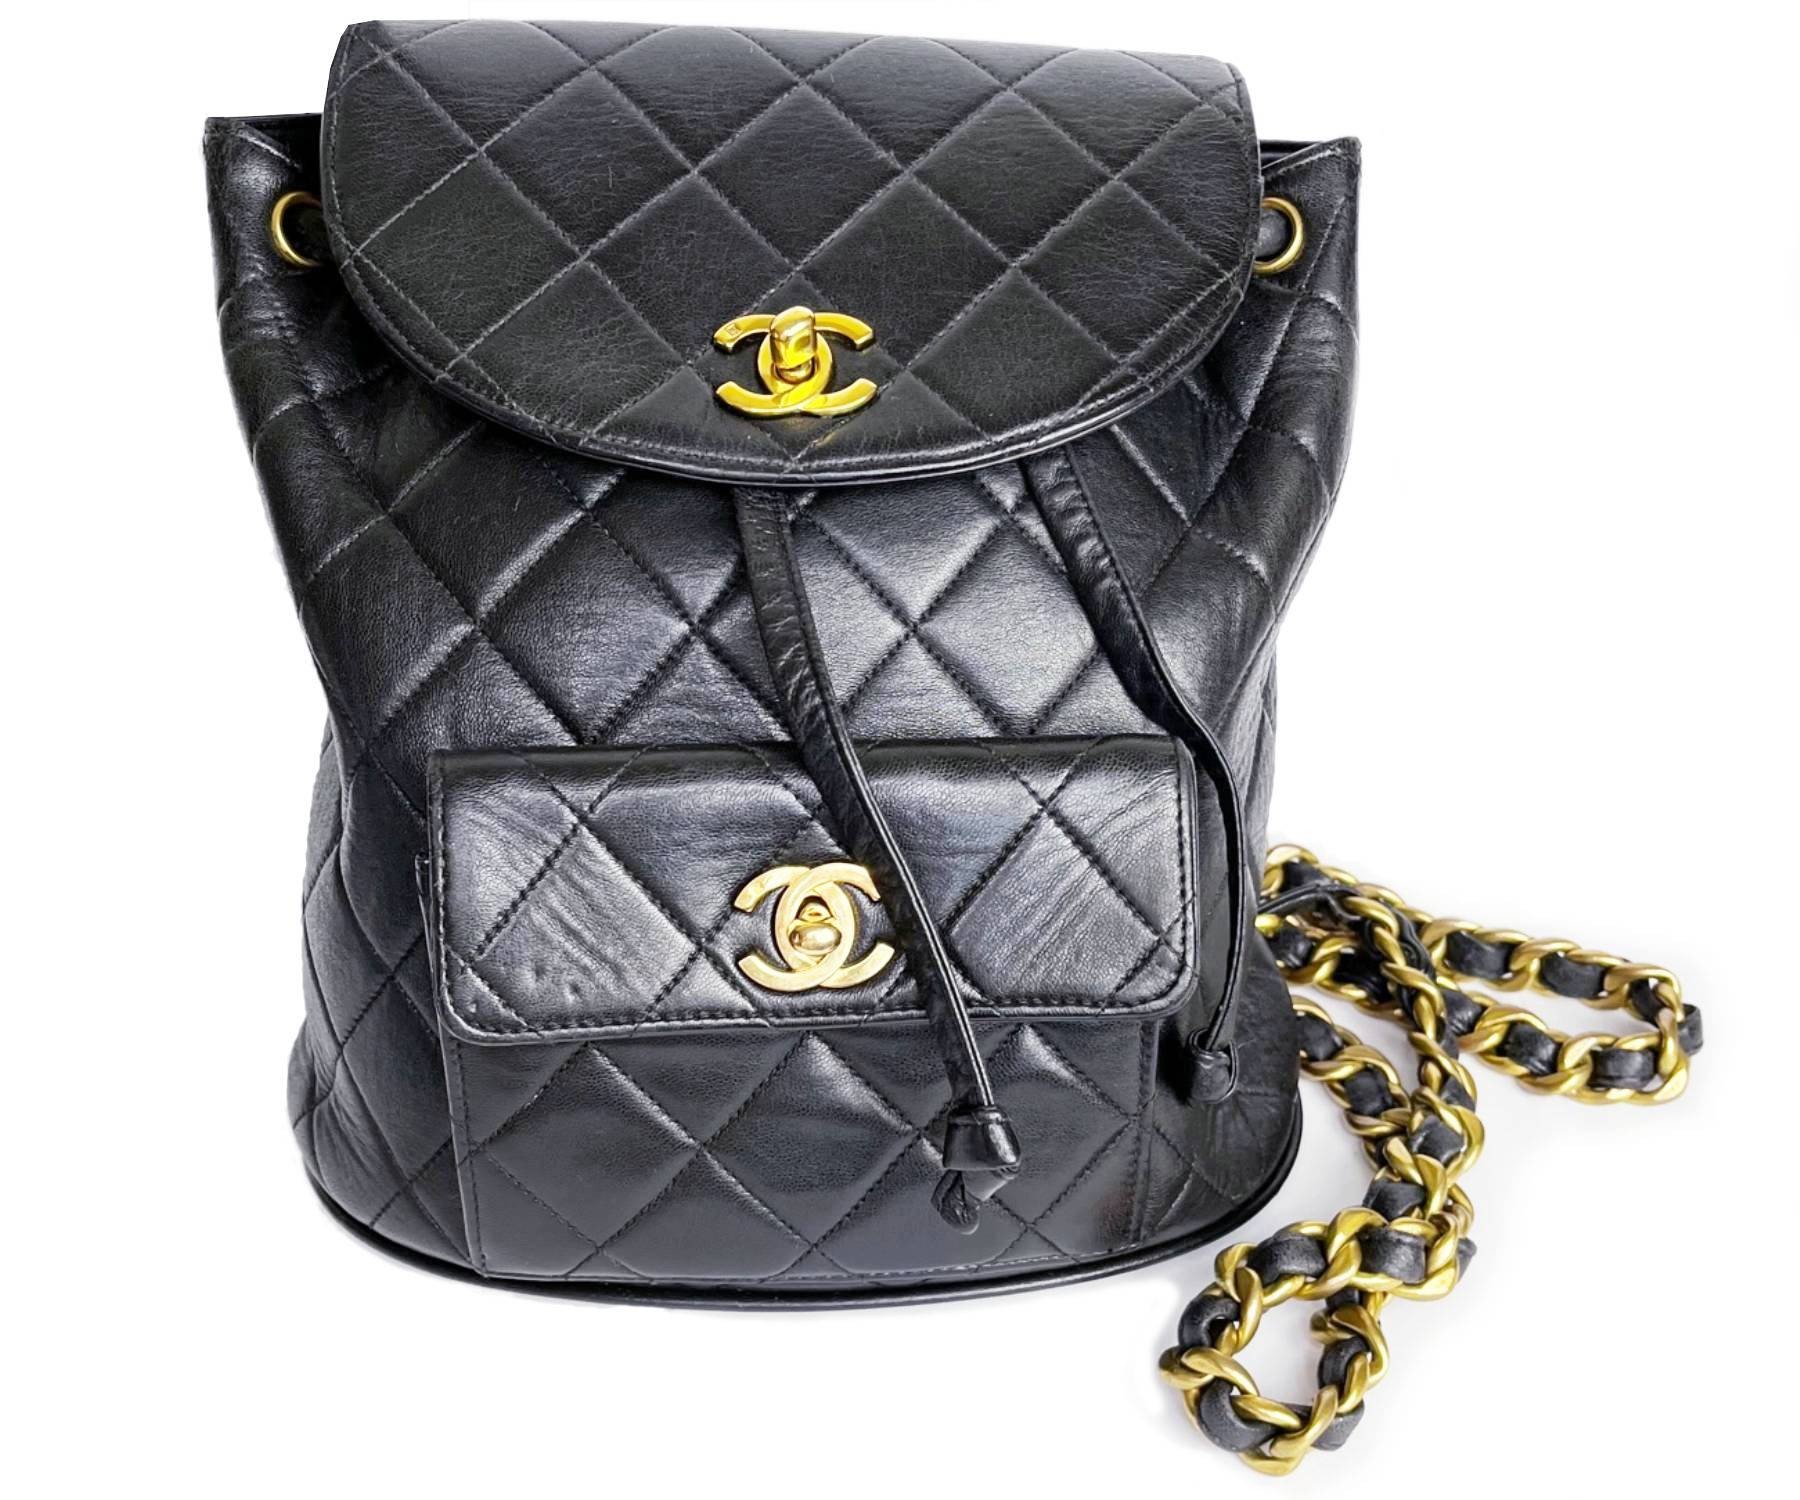 Duma leather backpack Chanel Black in Leather - 40213489